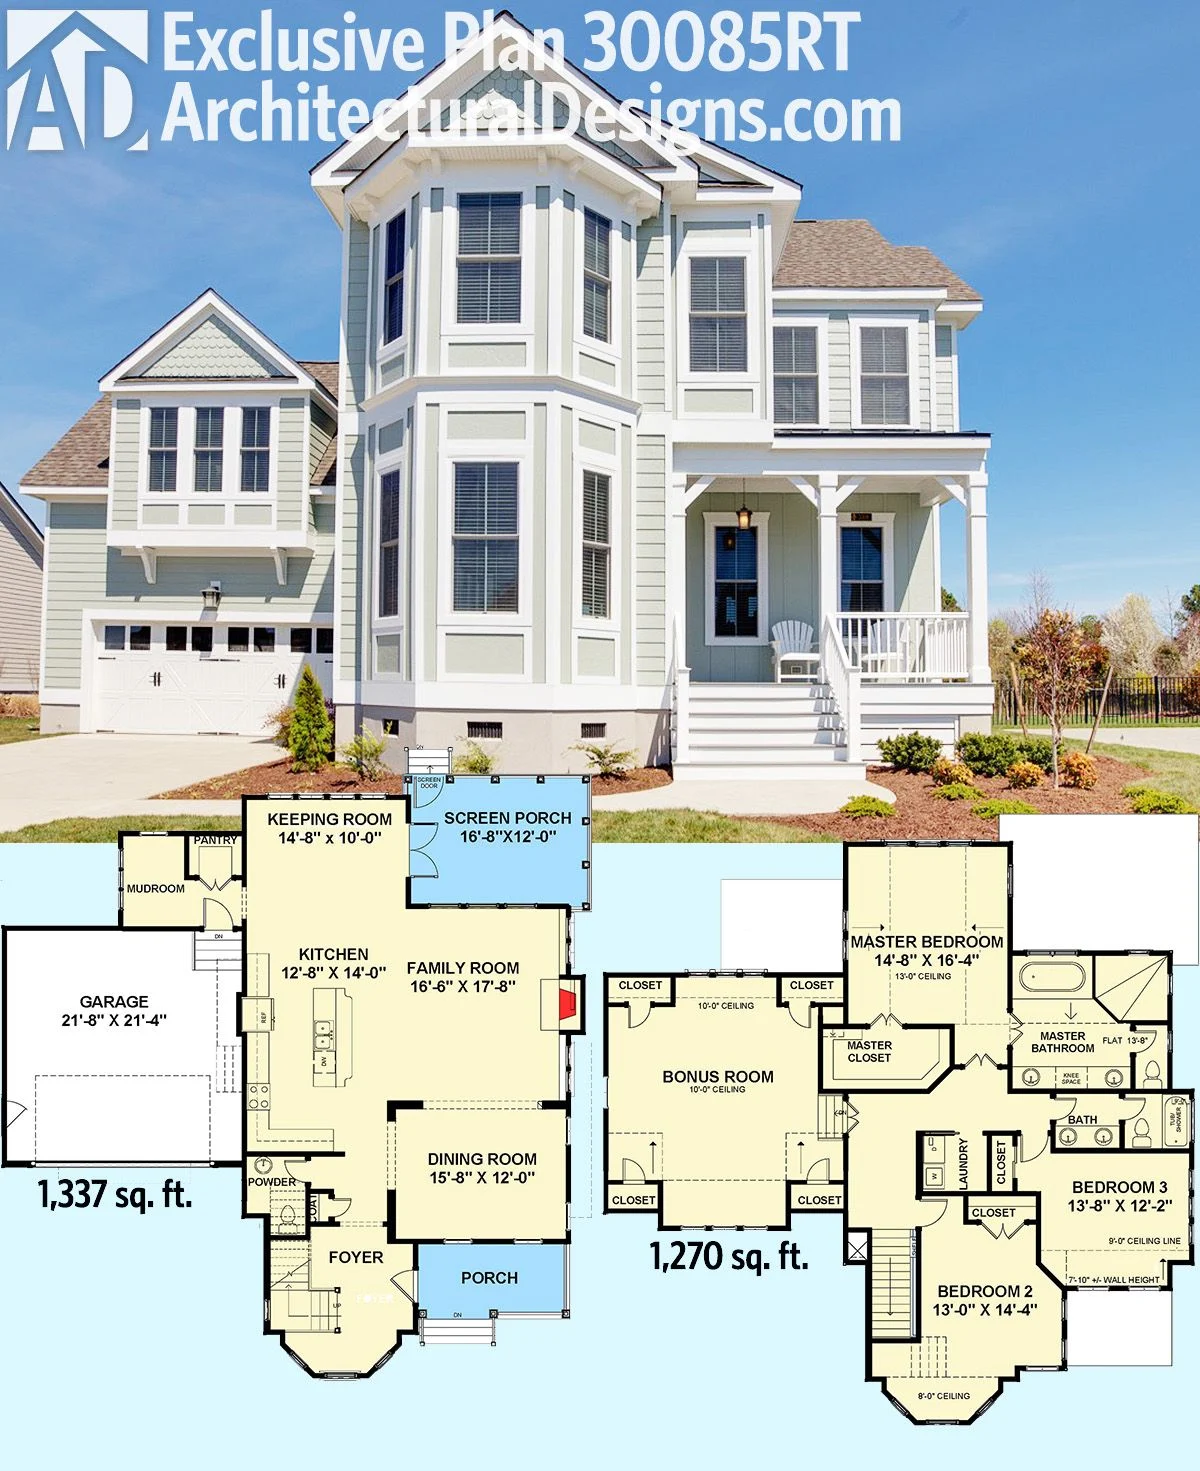 Plan 30085RT: Exclusive Victorian with Bay Windows  Victorian